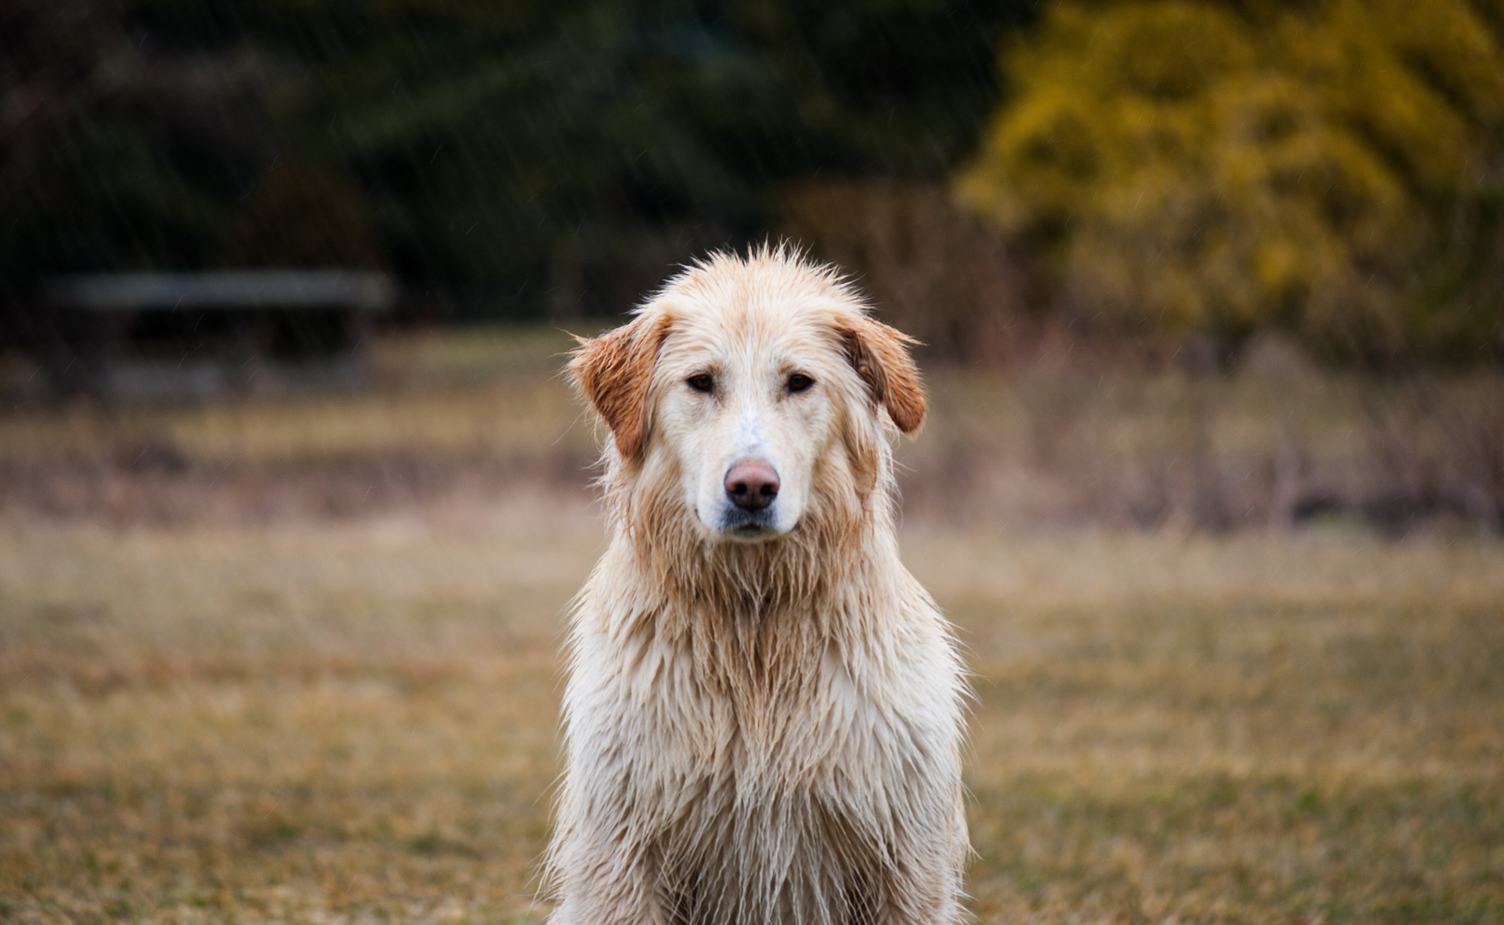 Golden Retriever Dog sitting with Wet Hair Outdoors